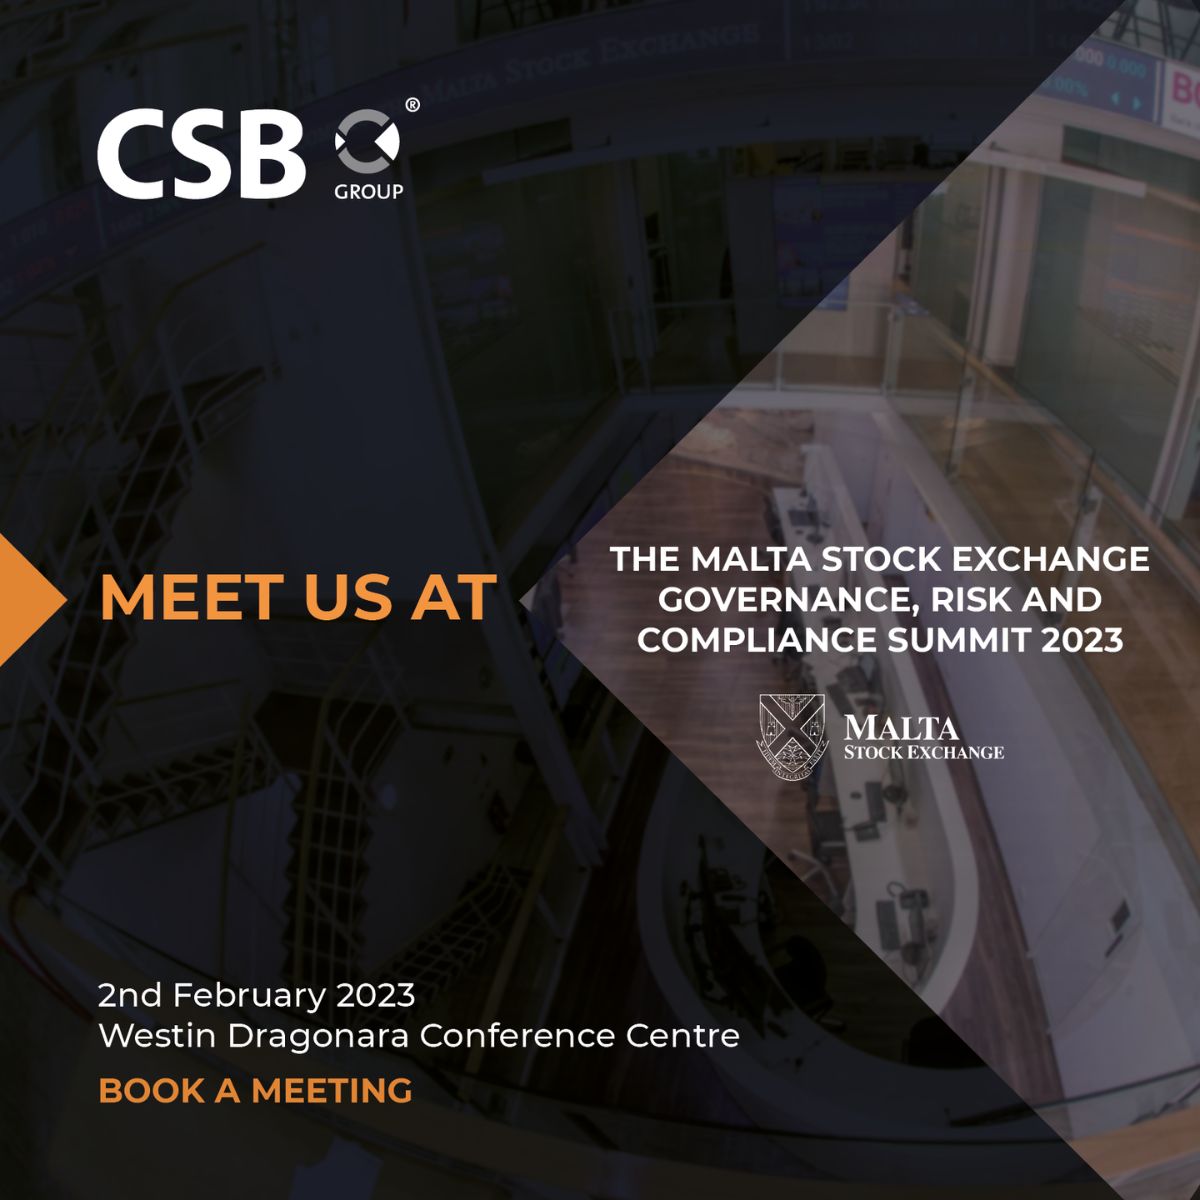 CSB Group to exhibit at the Malta Stock Exchange Governance, Risk and Compliance Summit